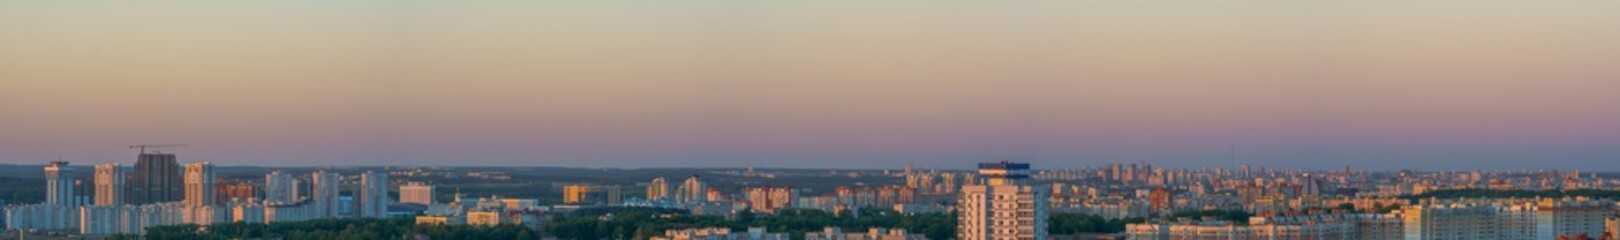 Panorama of the city of Minsk